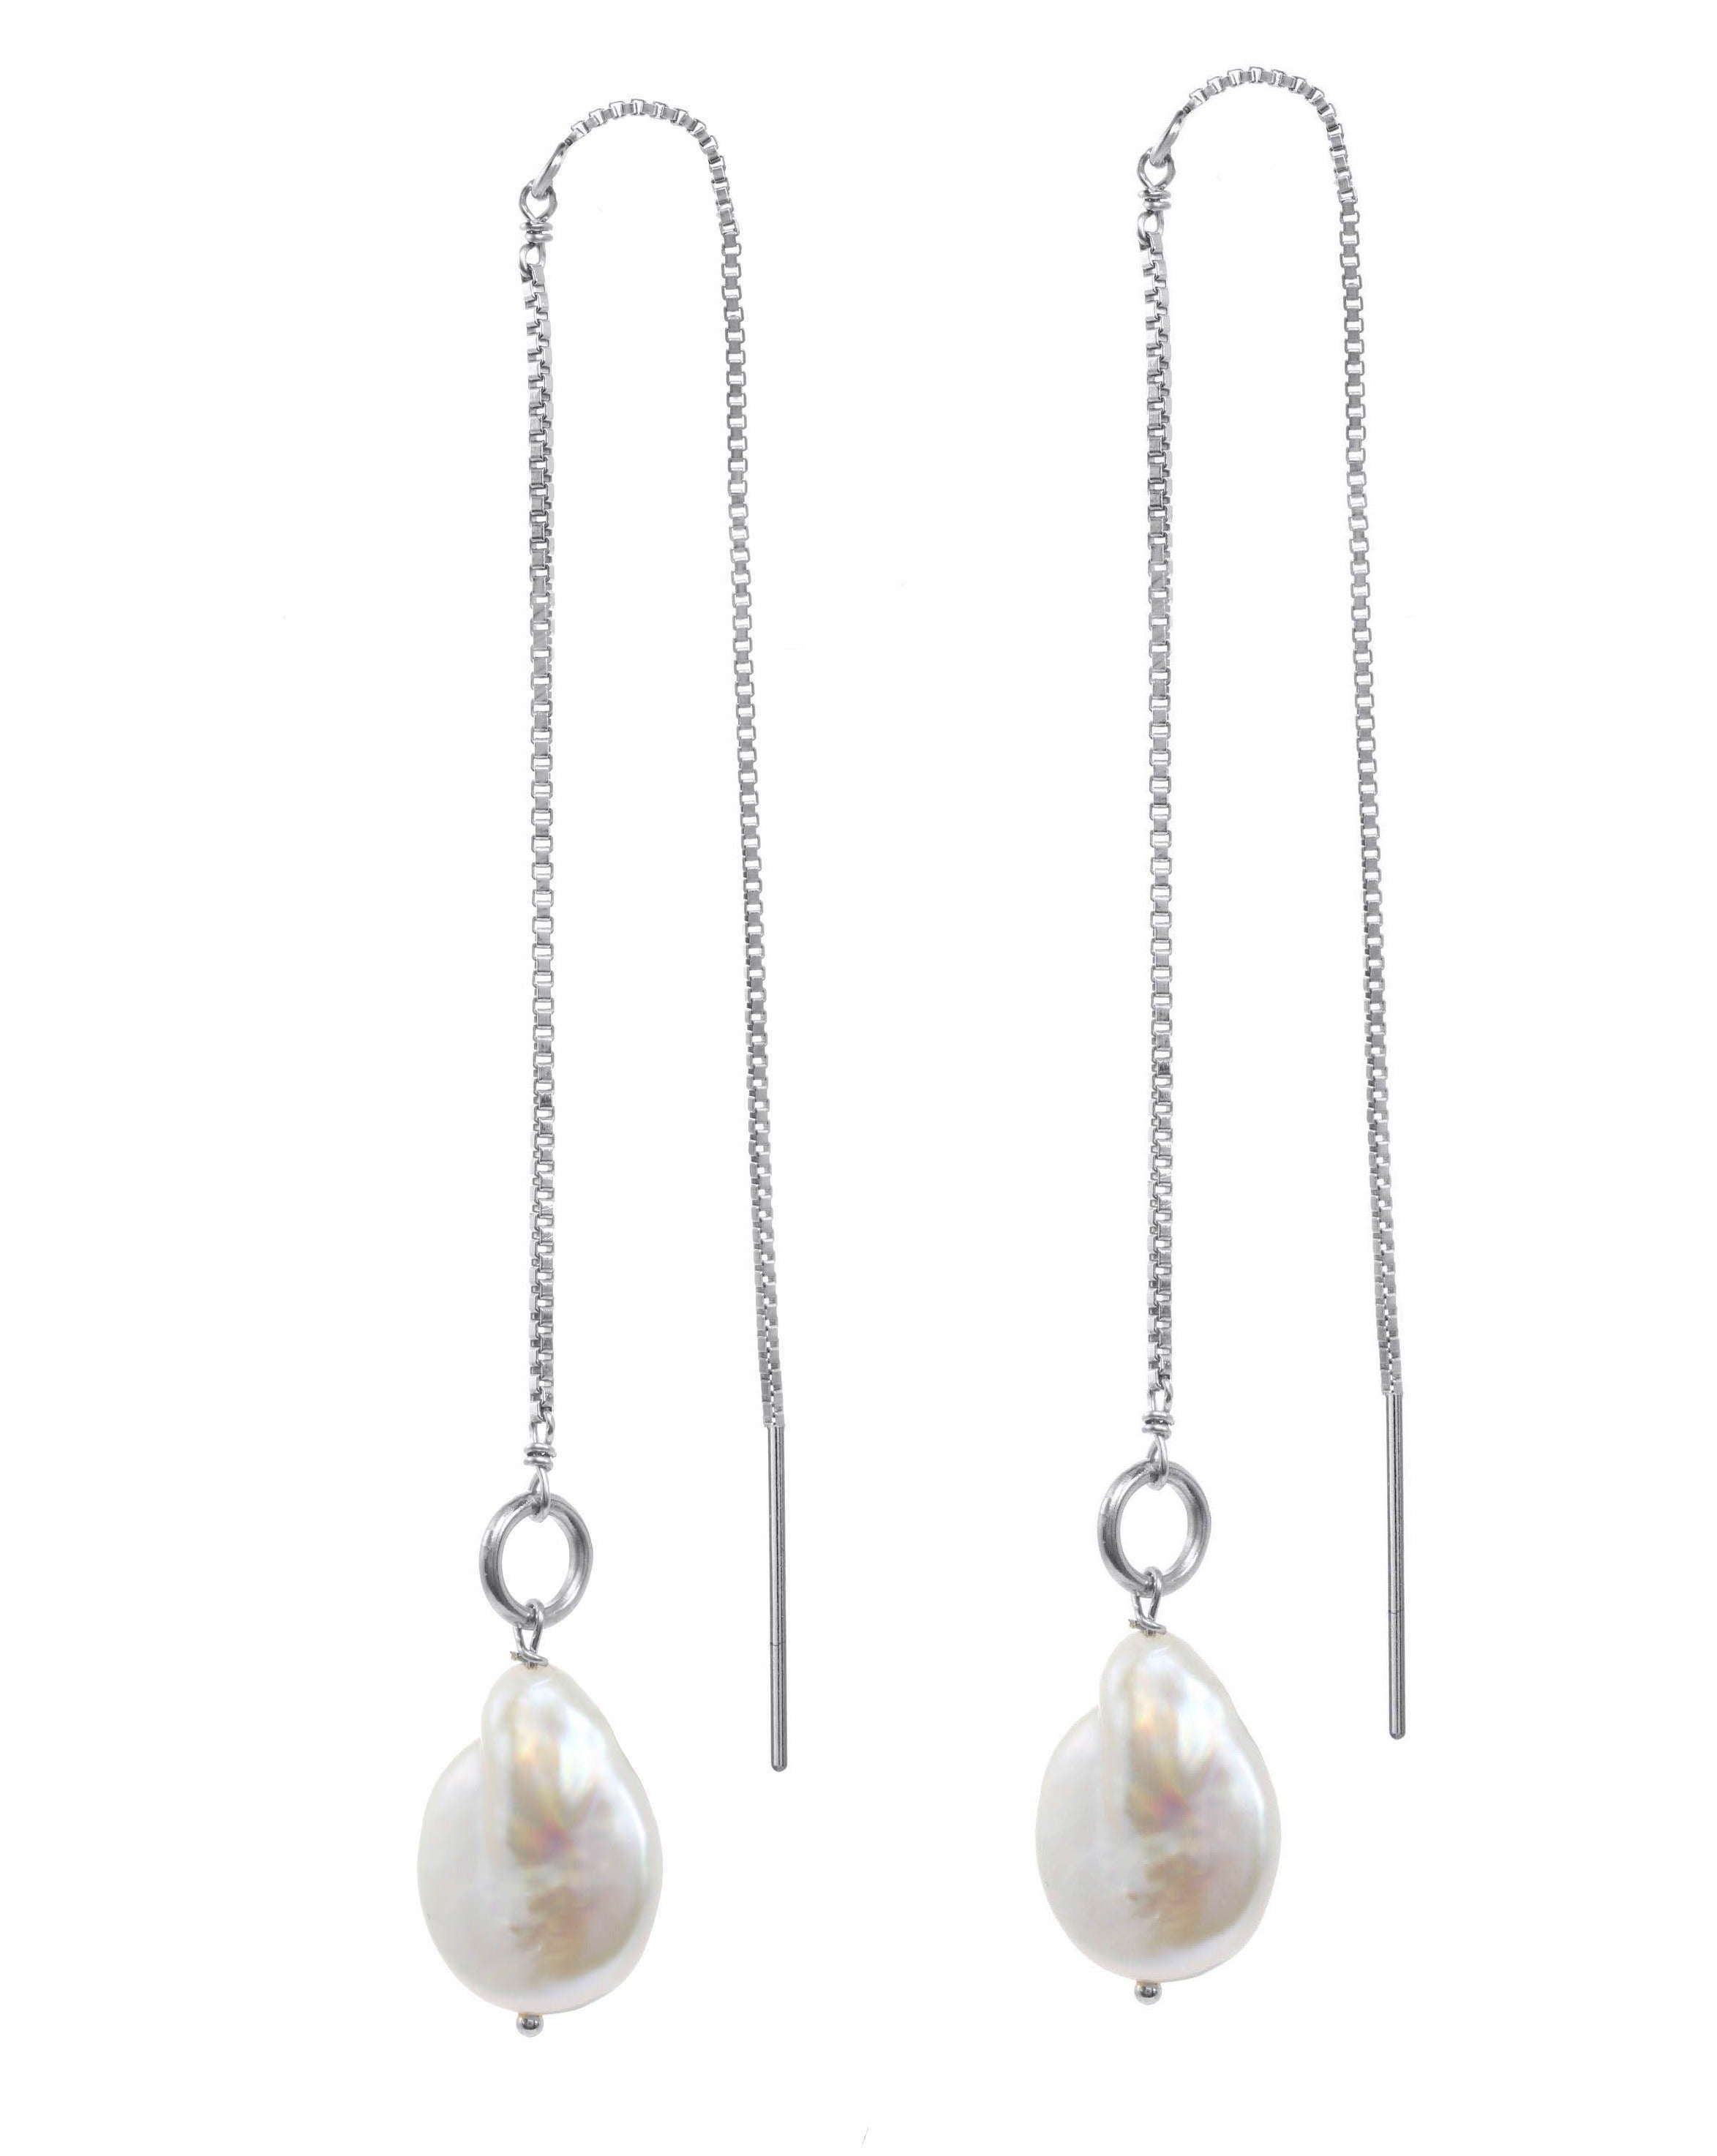 Genesis Threaders by KOZAKH. Threader style earrings with drop length of 2 inches on both sides, crafted in Sterling Silver, featuring Baroque Pearls.